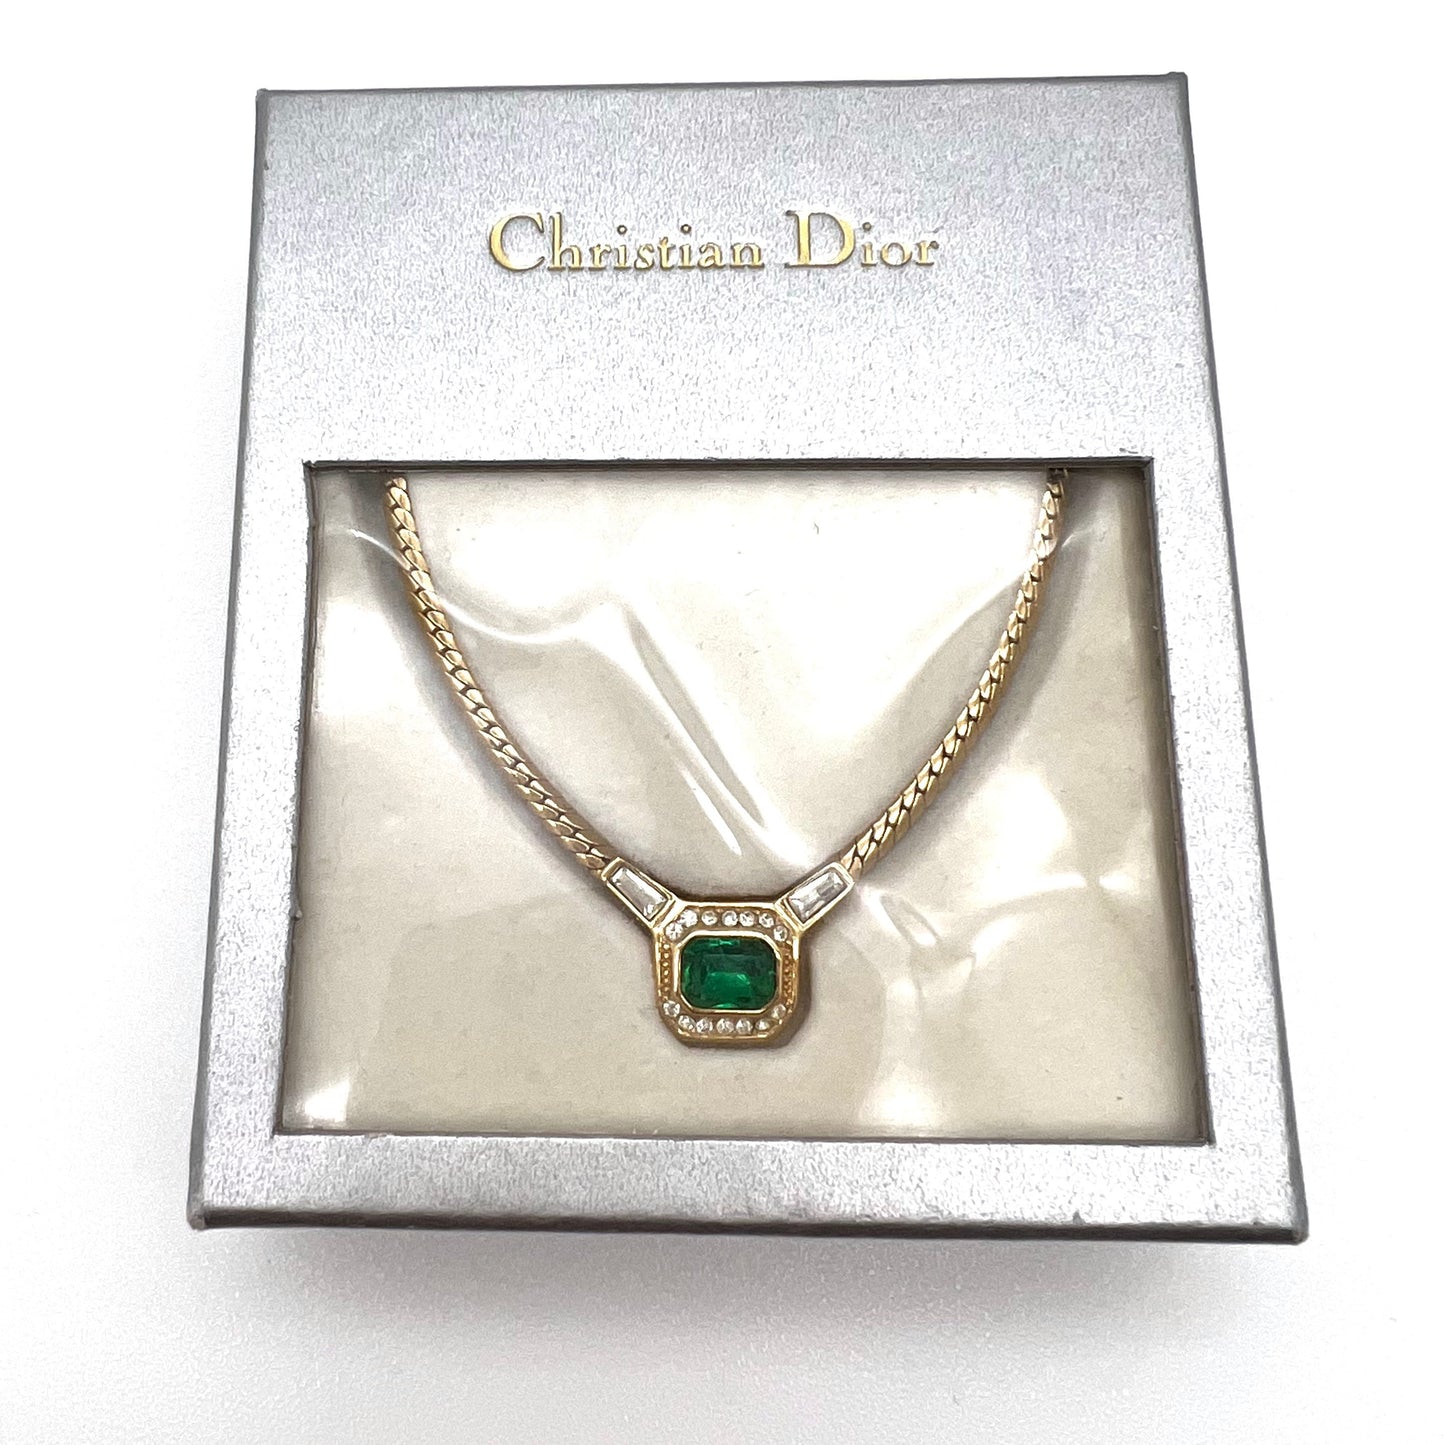 Christian Dior Germany 22ct Gold Plated Flawed Emerald and Crystal Integral Pendant Necklace In Original Box with Original Tag